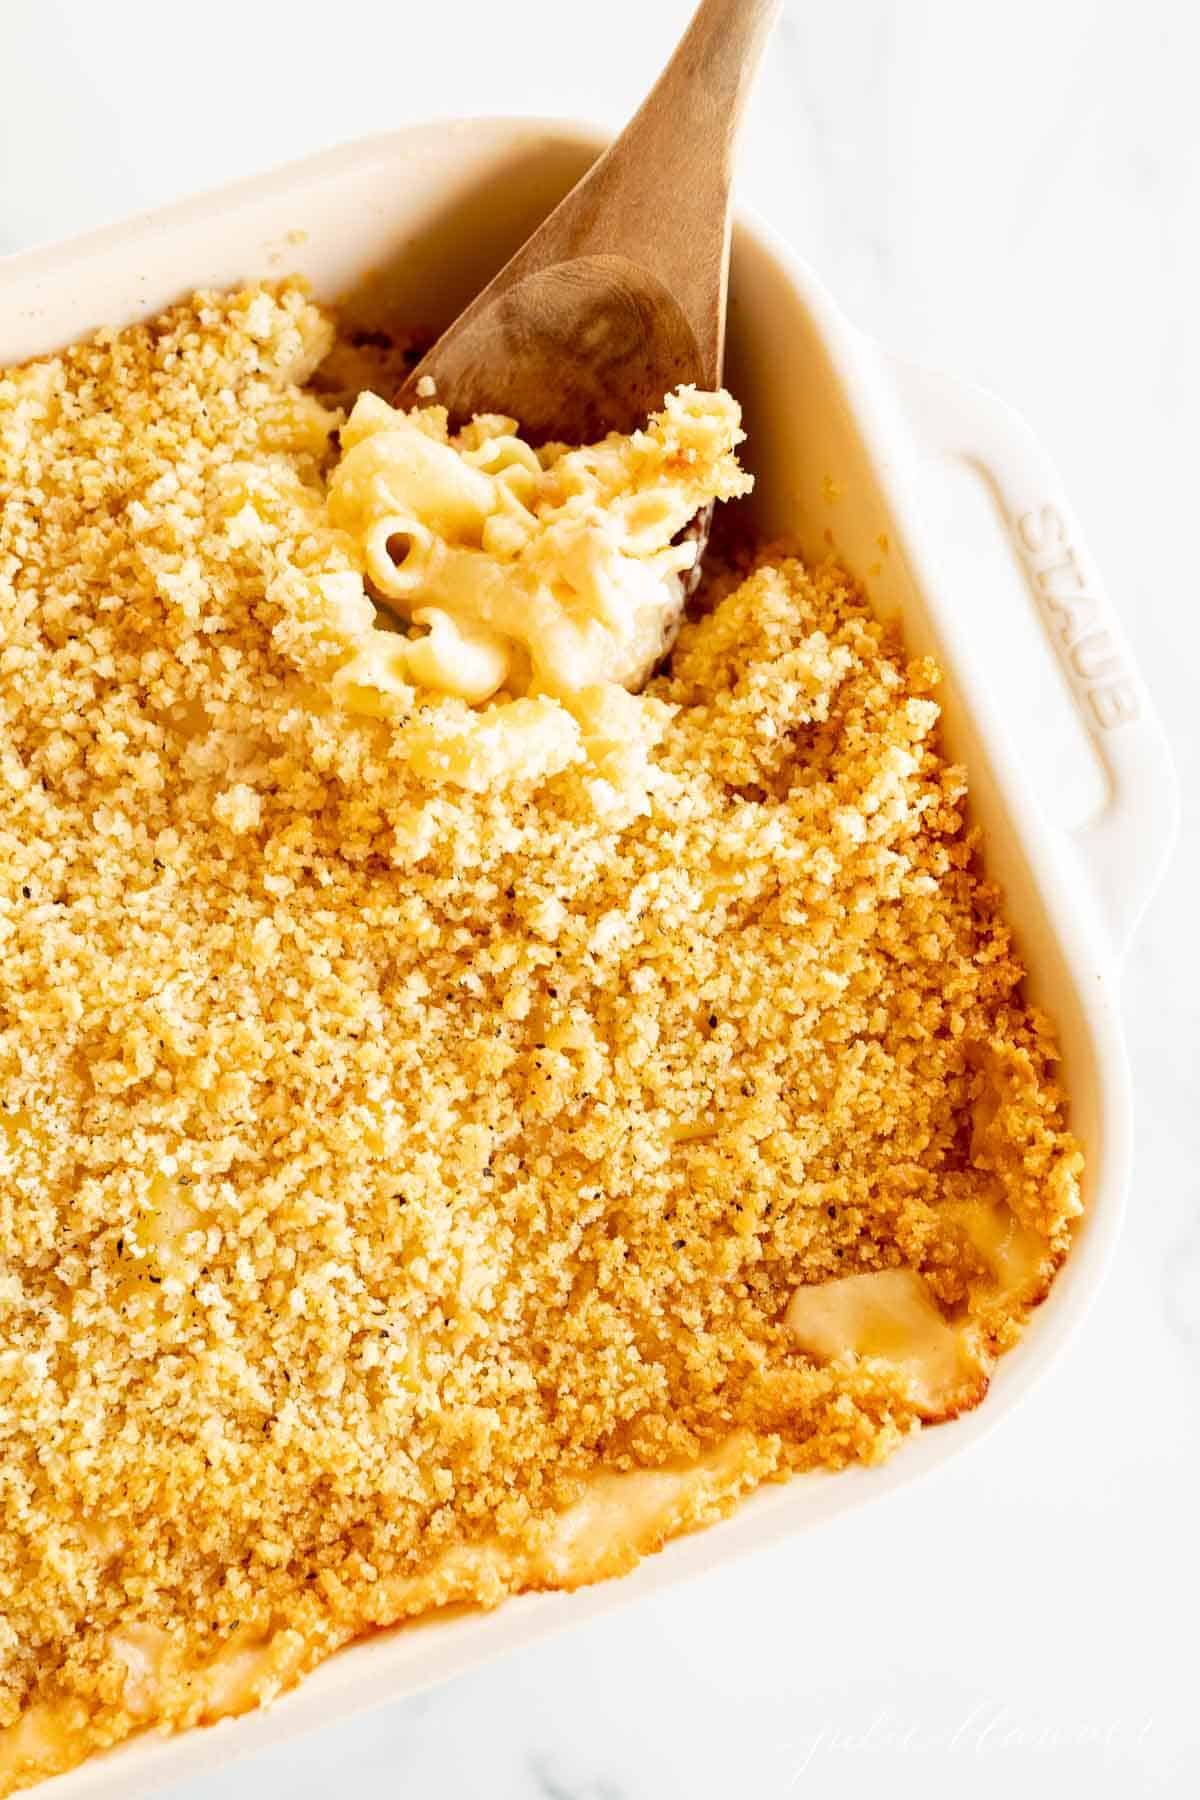 wooden spoon scooping baked macaroni and cheese out of a white casserole dish